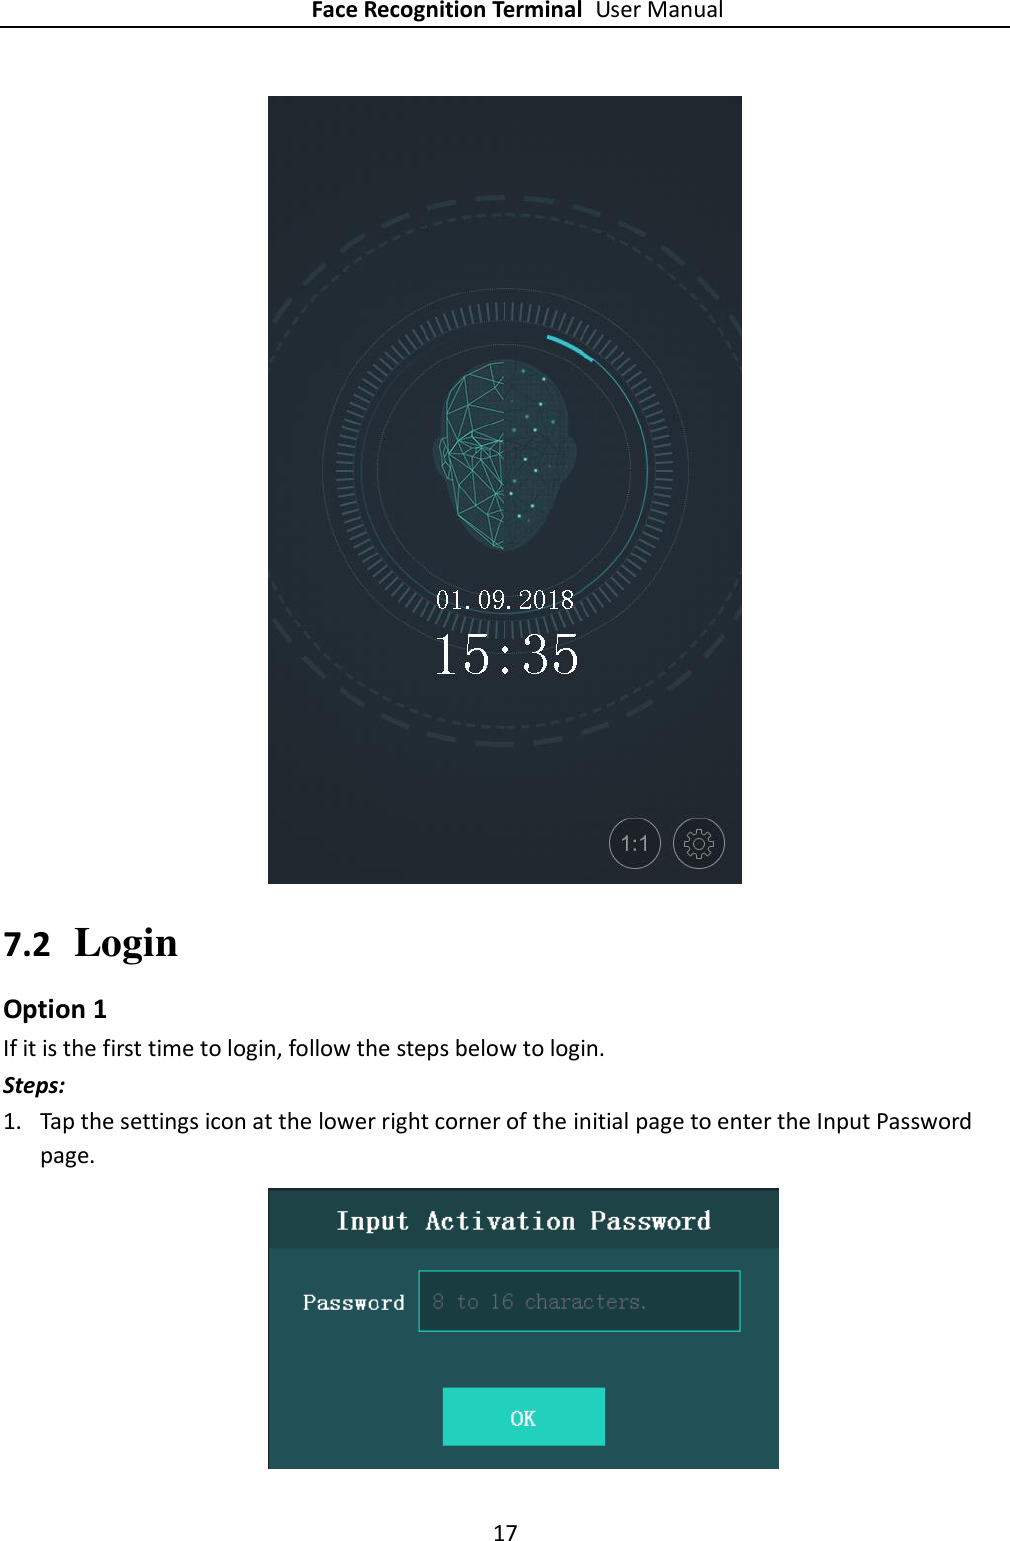 Face Recognition Terminal User Manual 17   7.2 Login Option 1 If it is the first time to login, follow the steps below to login. Steps: 1. Tap the settings icon at the lower right corner of the initial page to enter the Input Password page.    